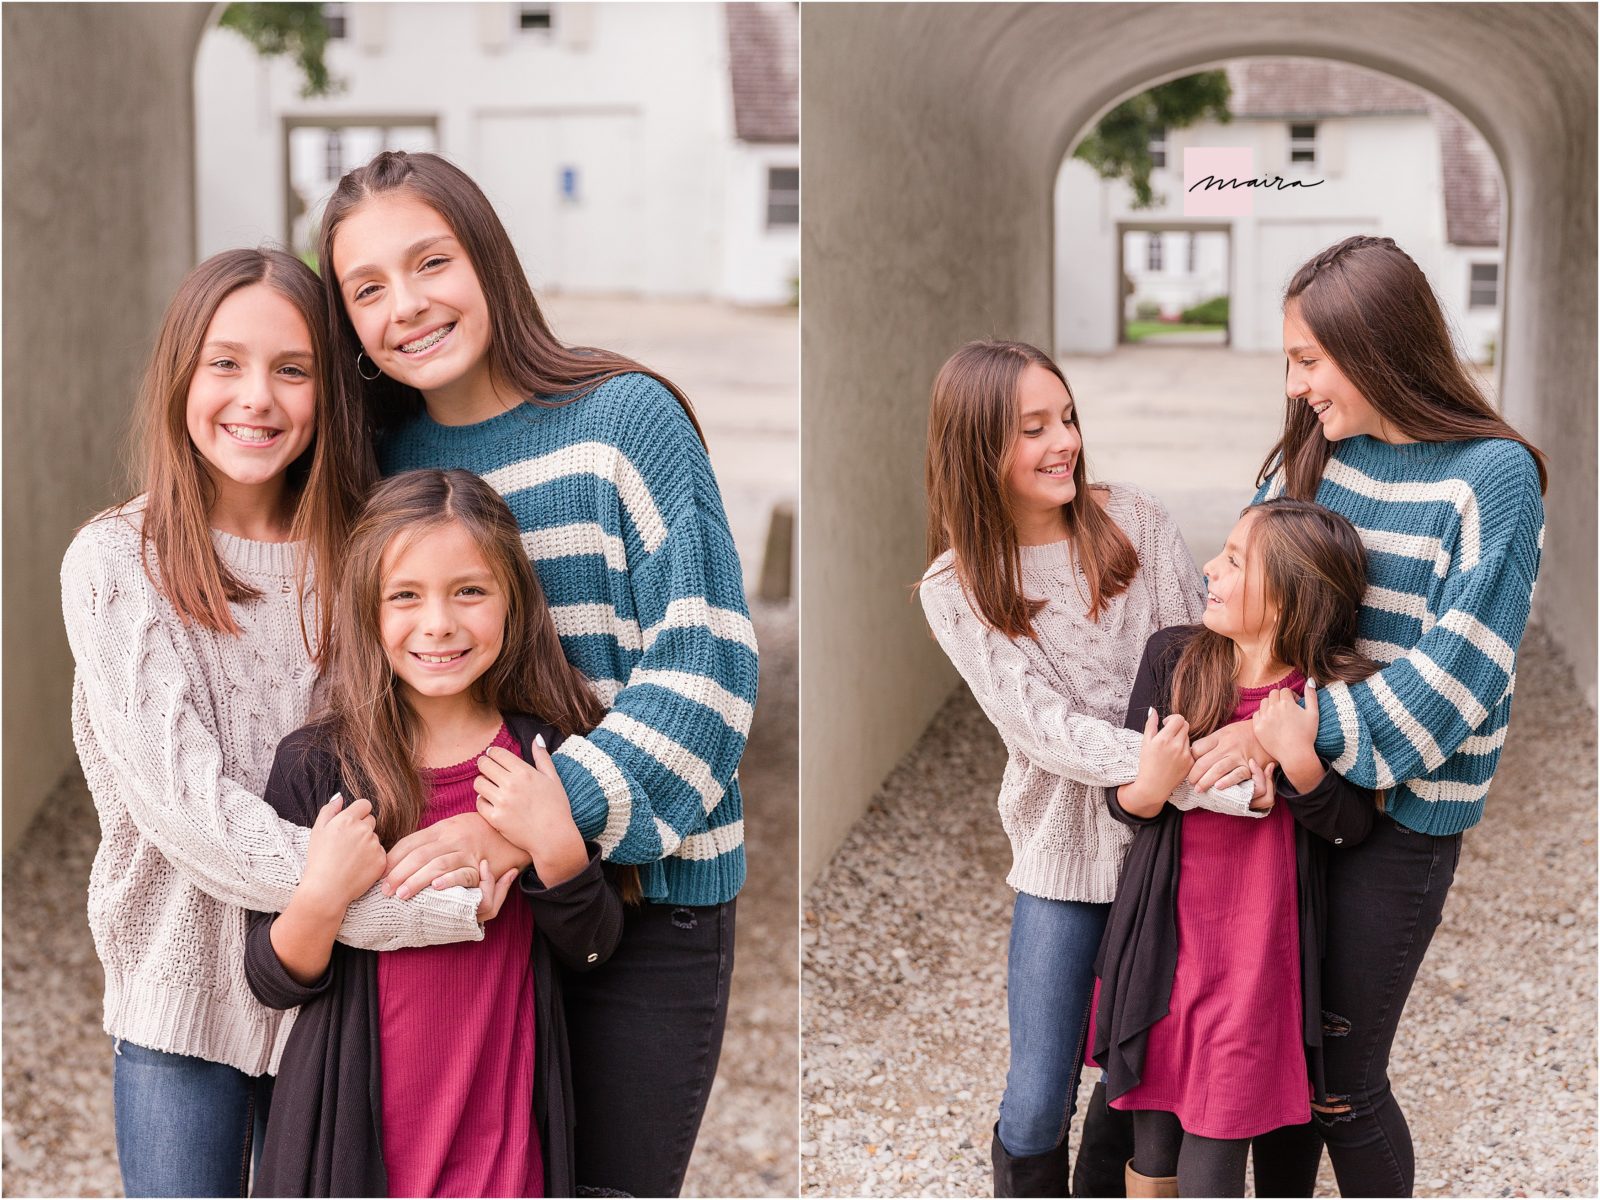 Beautiful Family Session in Adler Park, Libertyville, IL Mother and her four sweet daughters 